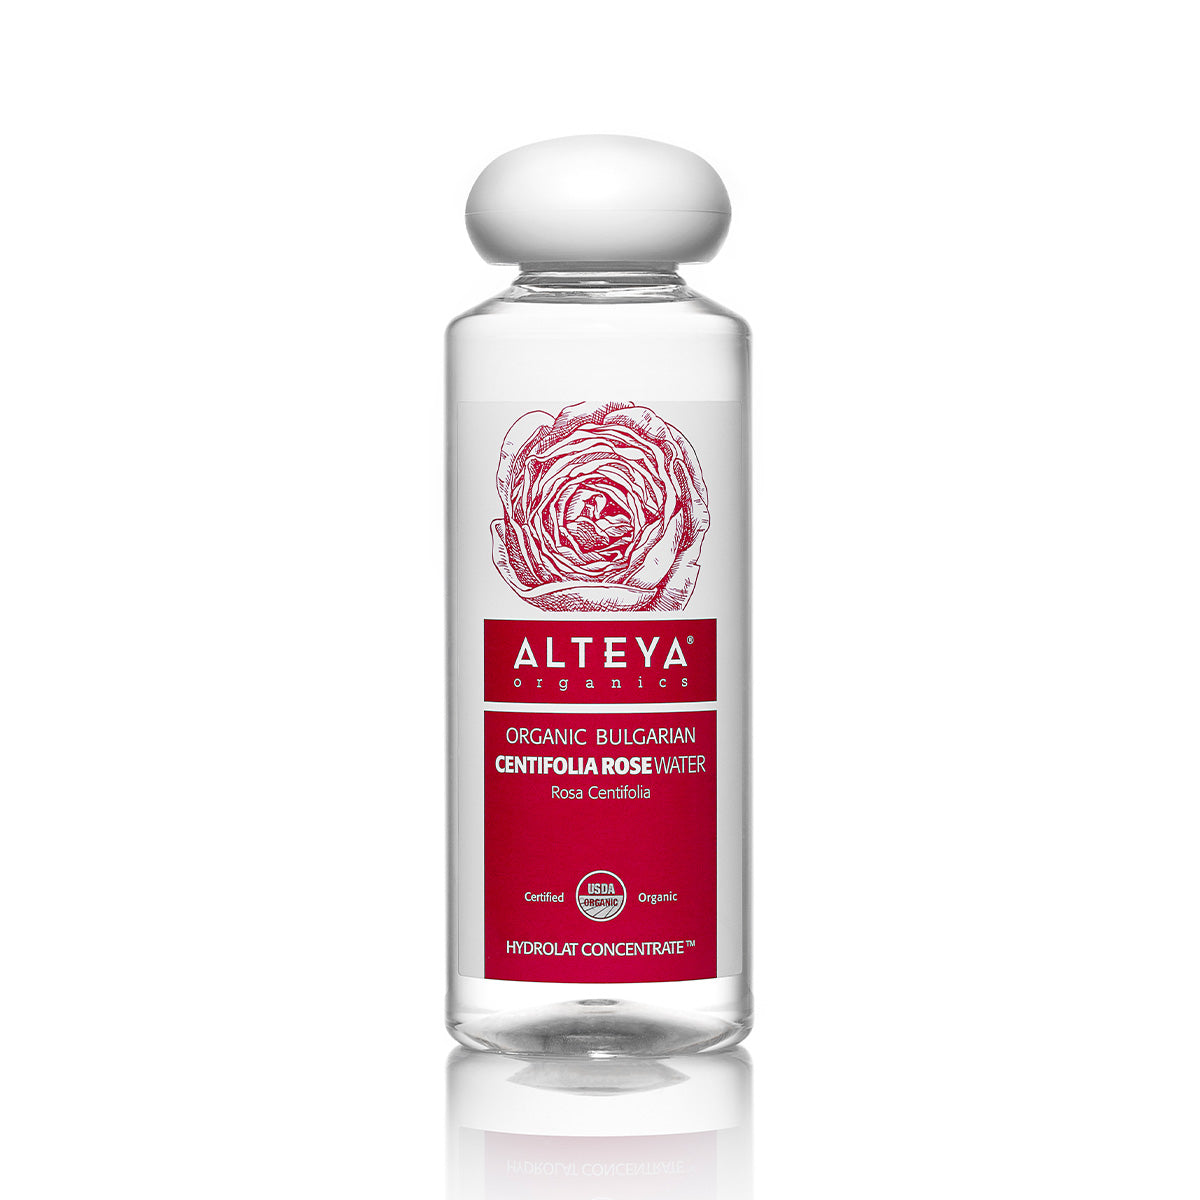 A bottle of Bulgarian Organic Centifolia Rose Water 8.5 Fl Oz by Alteya Organics with roses on a white background.